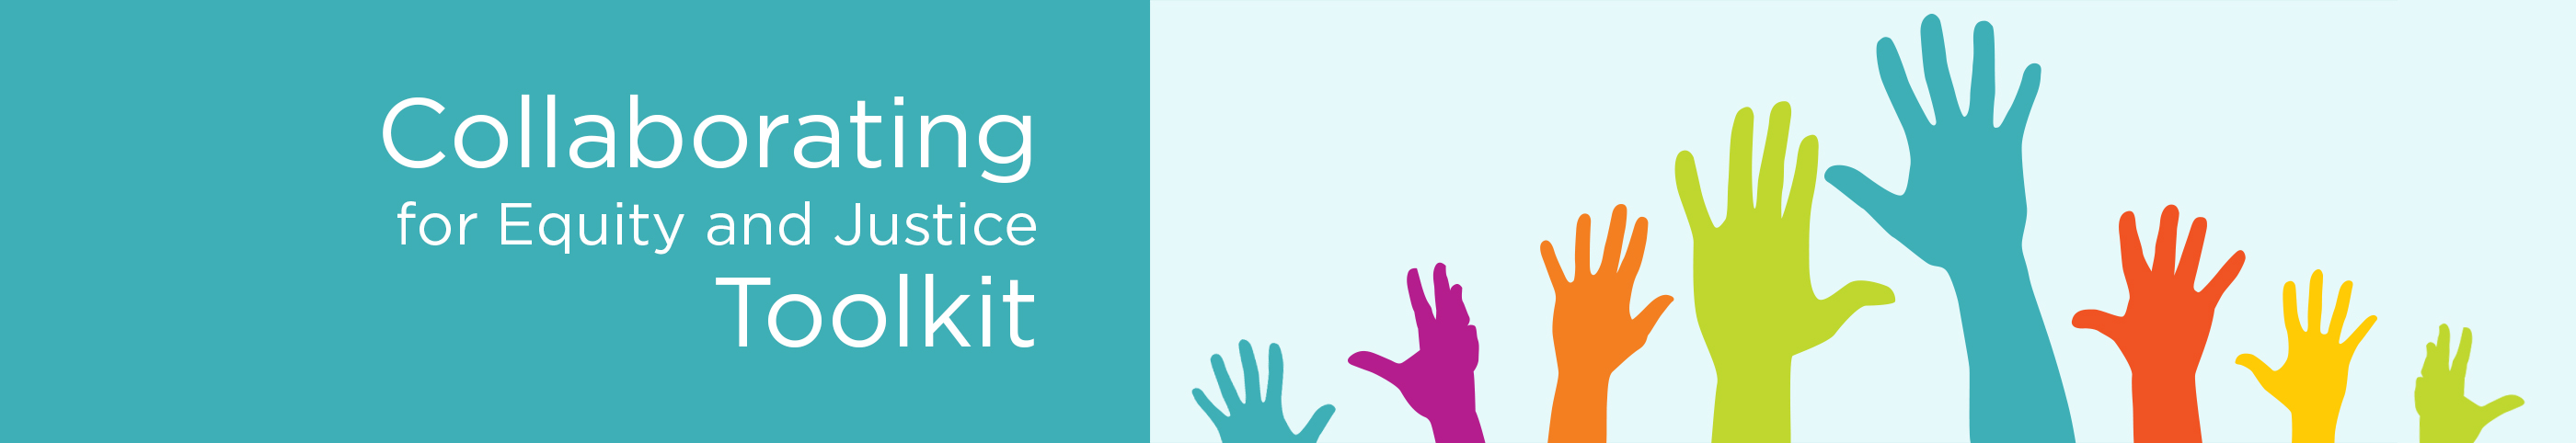 Collaborating for Equity and Justice Toolkit banner image with multicolored hands reaching upward.